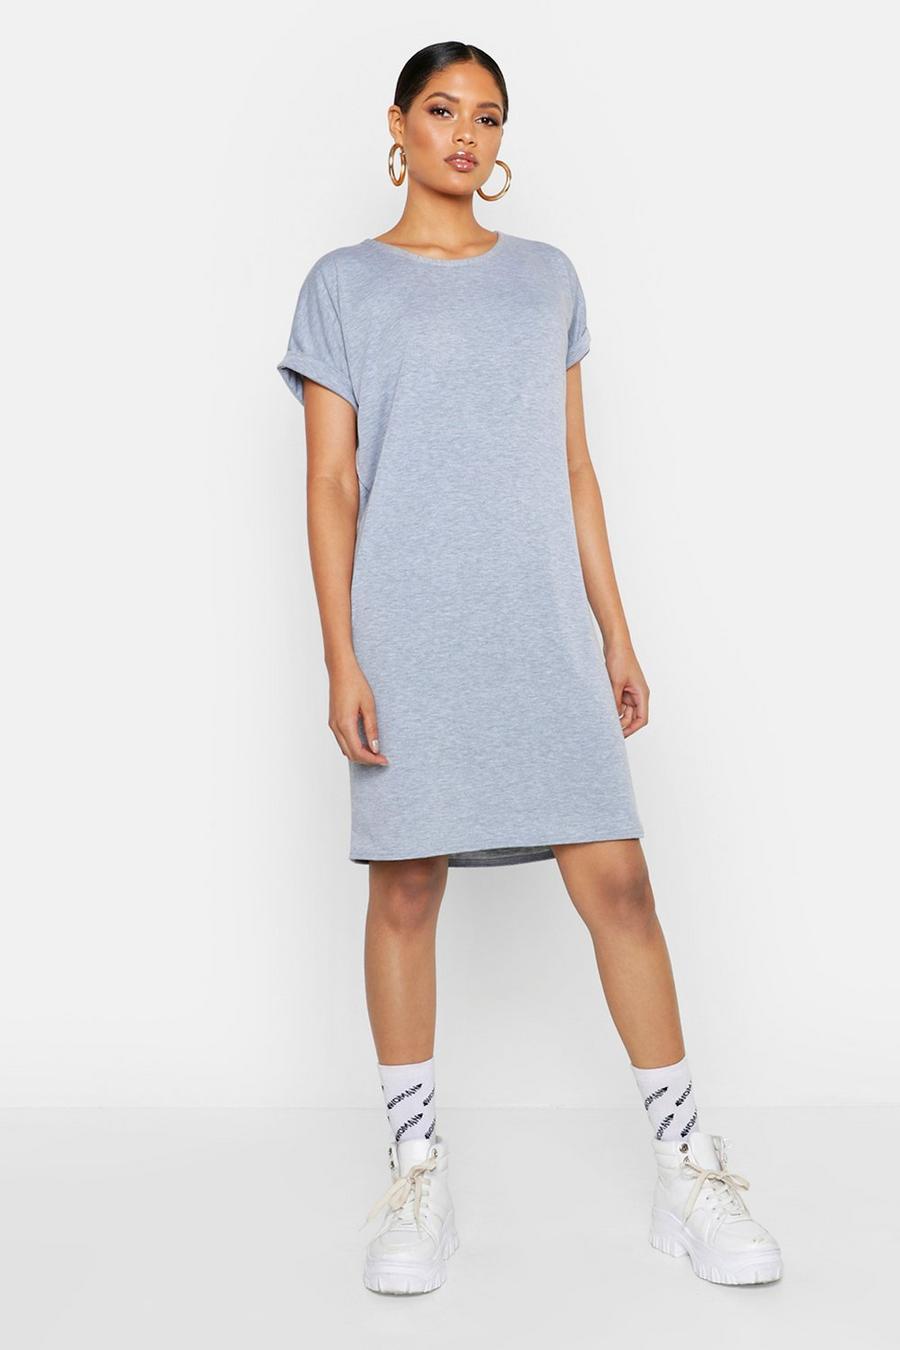 Grey marl Tall Oversized T-Shirt Dress image number 1